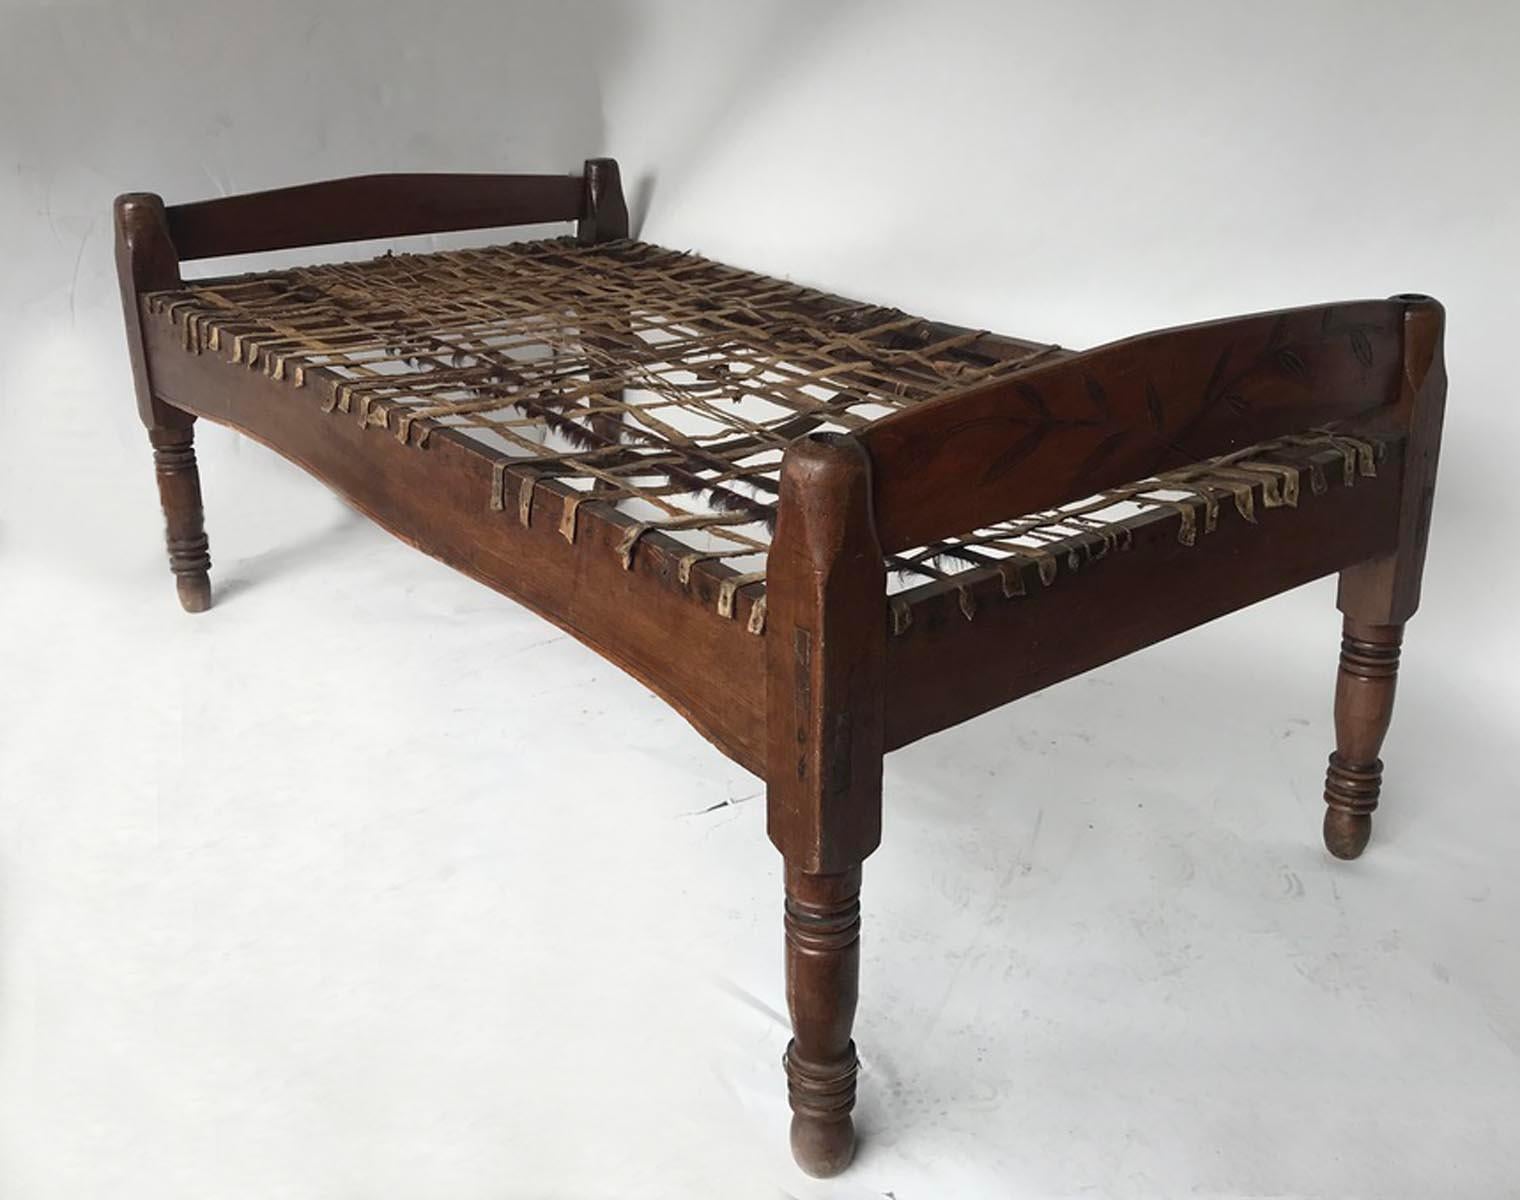 Late 19th to early 20th century cedro (tropical hardwood) bed from Guatemala. Hide straps. Great rustic look. Can be used as a day bed or a bed - just add the mattress! Carving on one side.